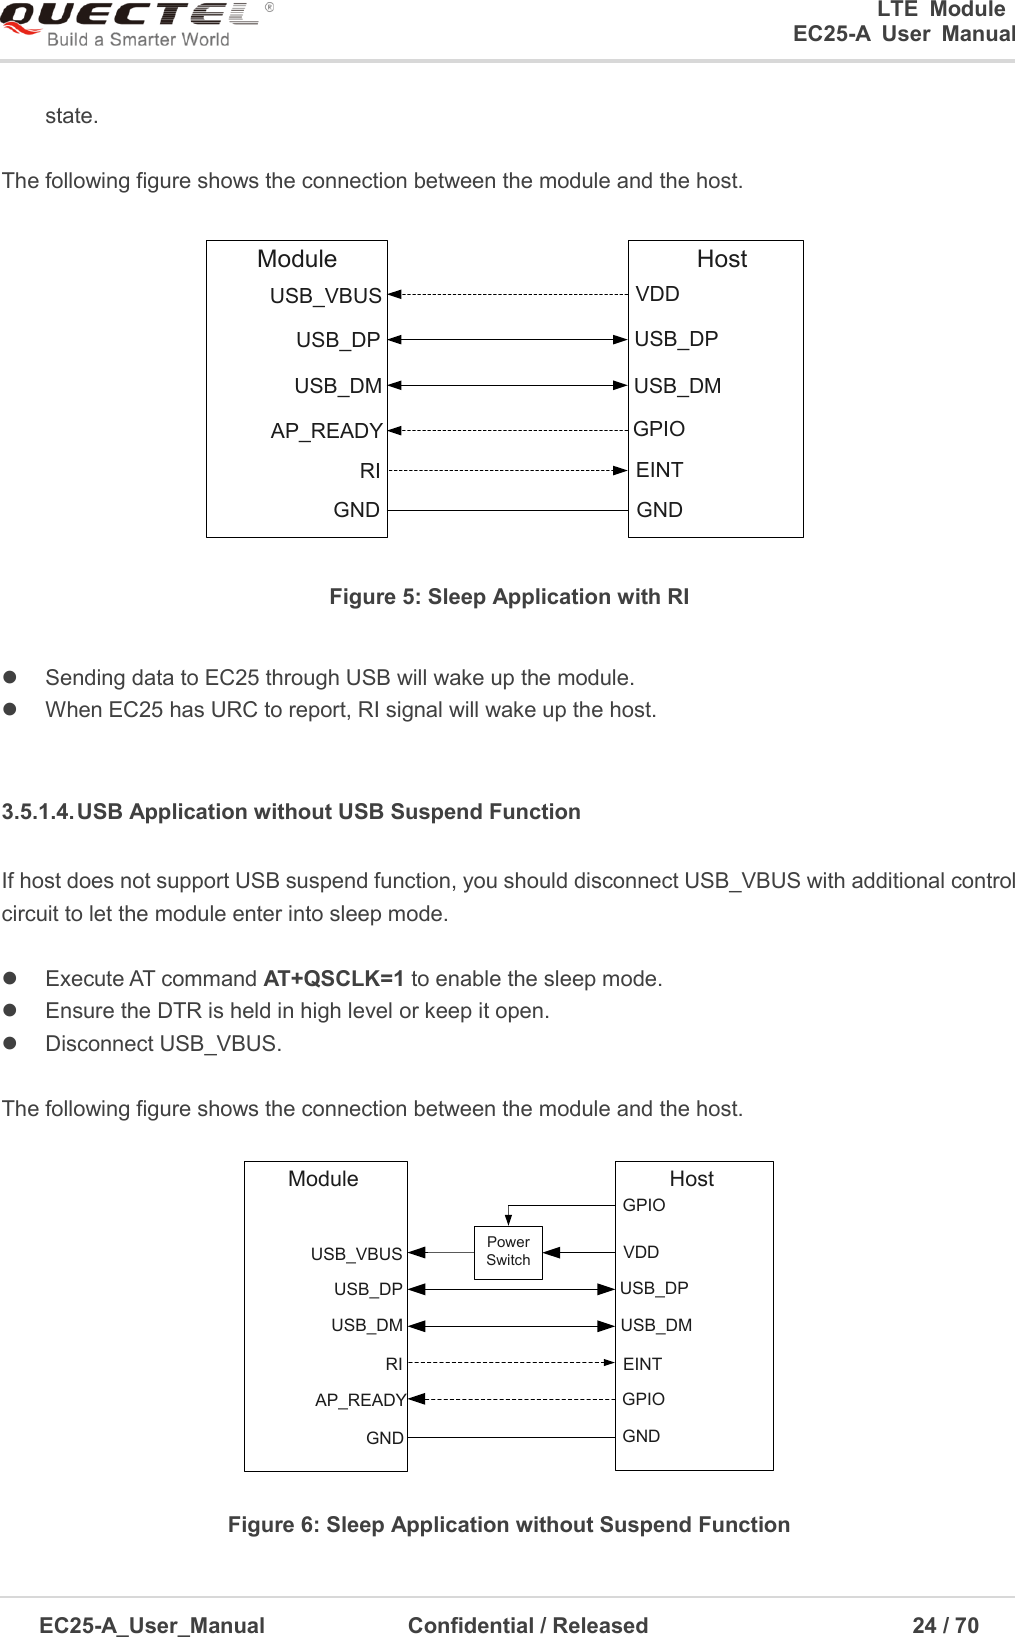 0                                                                       LTE  Module                                                    EC25-A  User  Manual  EC25-A_User_Manual               Confidential / Released                                            24 / 7      state.  The following figure shows the connection between the module and the host. USB_VBUSUSB_DPUSB_DMAP_READYVDDUSB_DPUSB_DMGPIOModule HostGND GNDRI EINT Figure 5: Sleep Application with RI    Sending data to EC25 through USB will wake up the module.     When EC25 has URC to report, RI signal will wake up the host.    3.5.1.4. USB Application without USB Suspend Function If host does not support USB suspend function, you should disconnect USB_VBUS with additional control circuit to let the module enter into sleep mode.    Execute AT command AT+QSCLK=1 to enable the sleep mode.   Ensure the DTR is held in high level or keep it open.   Disconnect USB_VBUS.    The following figure shows the connection between the module and the host. USB_VBUSUSB_DPUSB_DMAP_READYVDDUSB_DPUSB_DMGPIOModule HostRI EINTPower SwitchGPIOGND GND Figure 6: Sleep Application without Suspend Function 